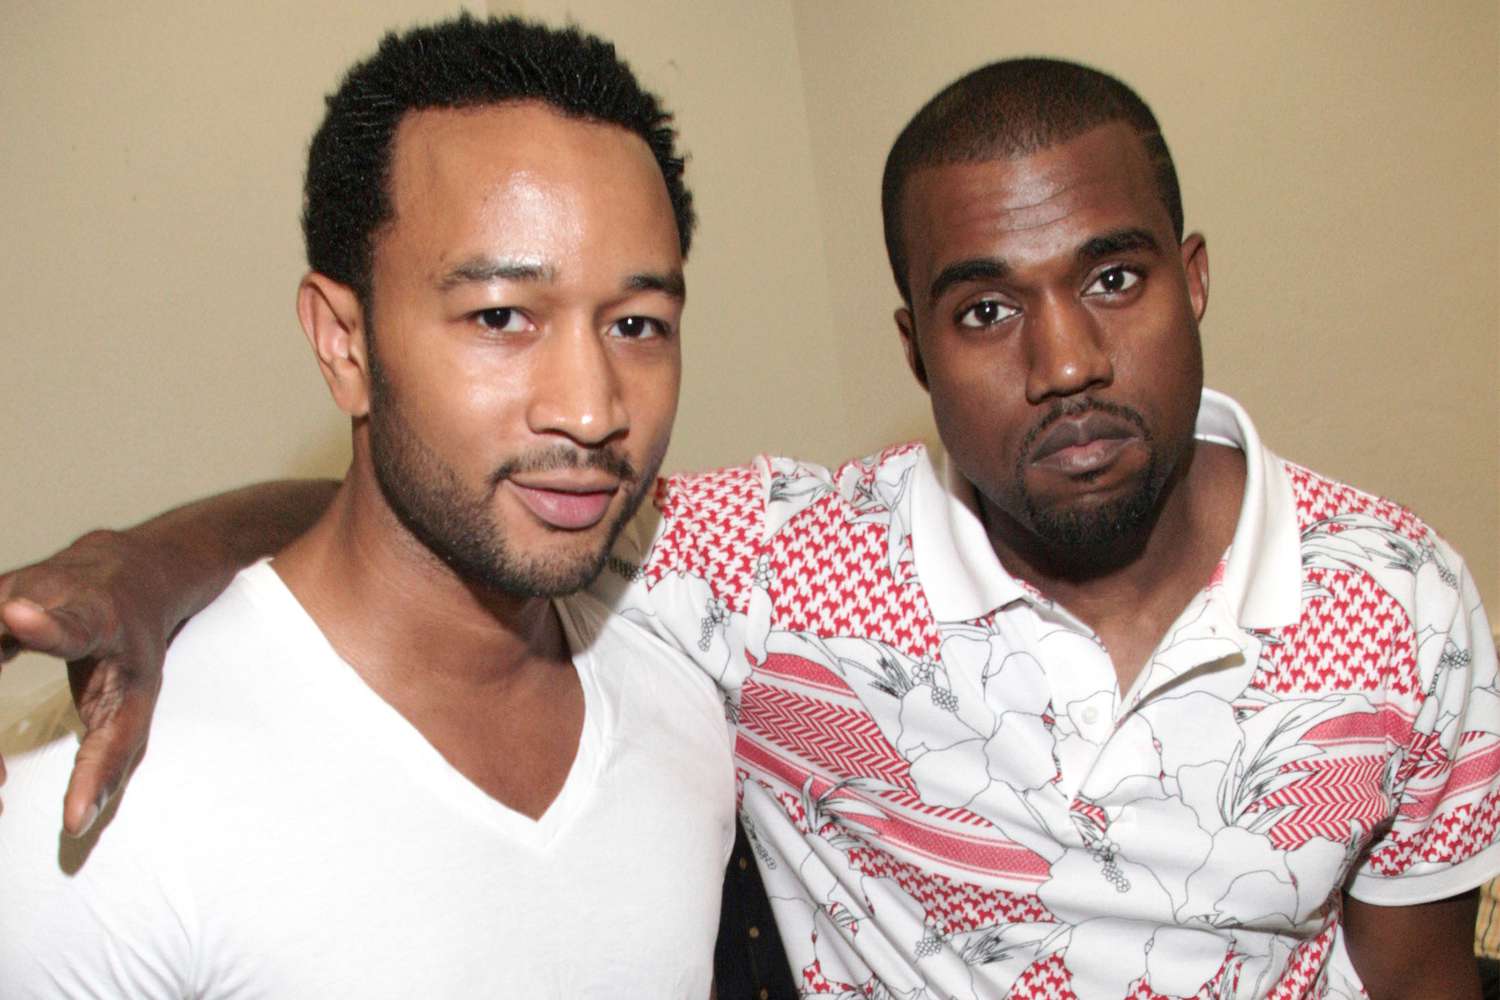 John Legend reveals why his friendship with Kanye West changed